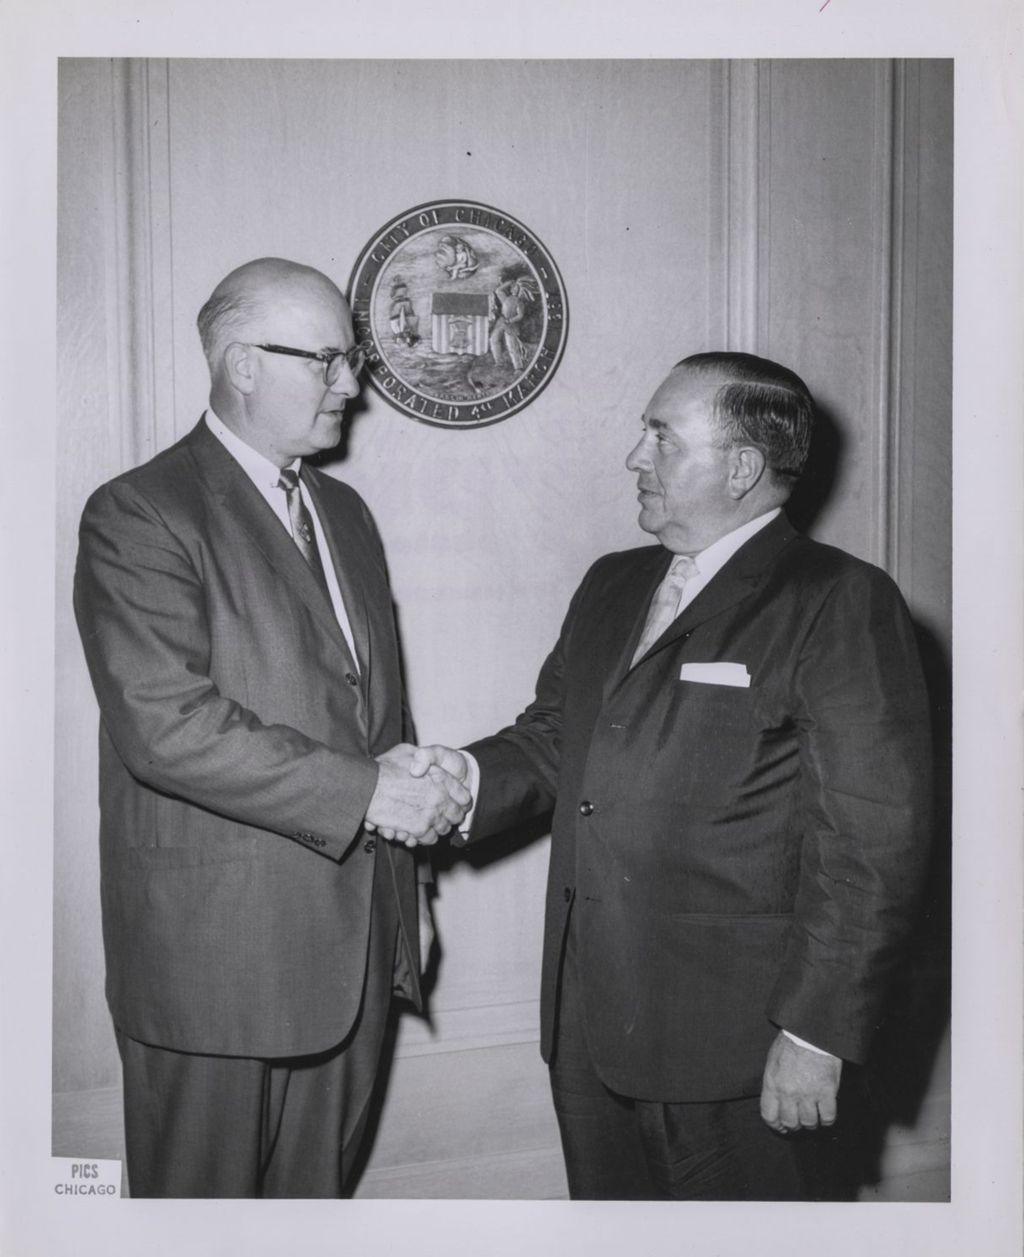 Miniature of Richard J. Daley greets a visitor to his office